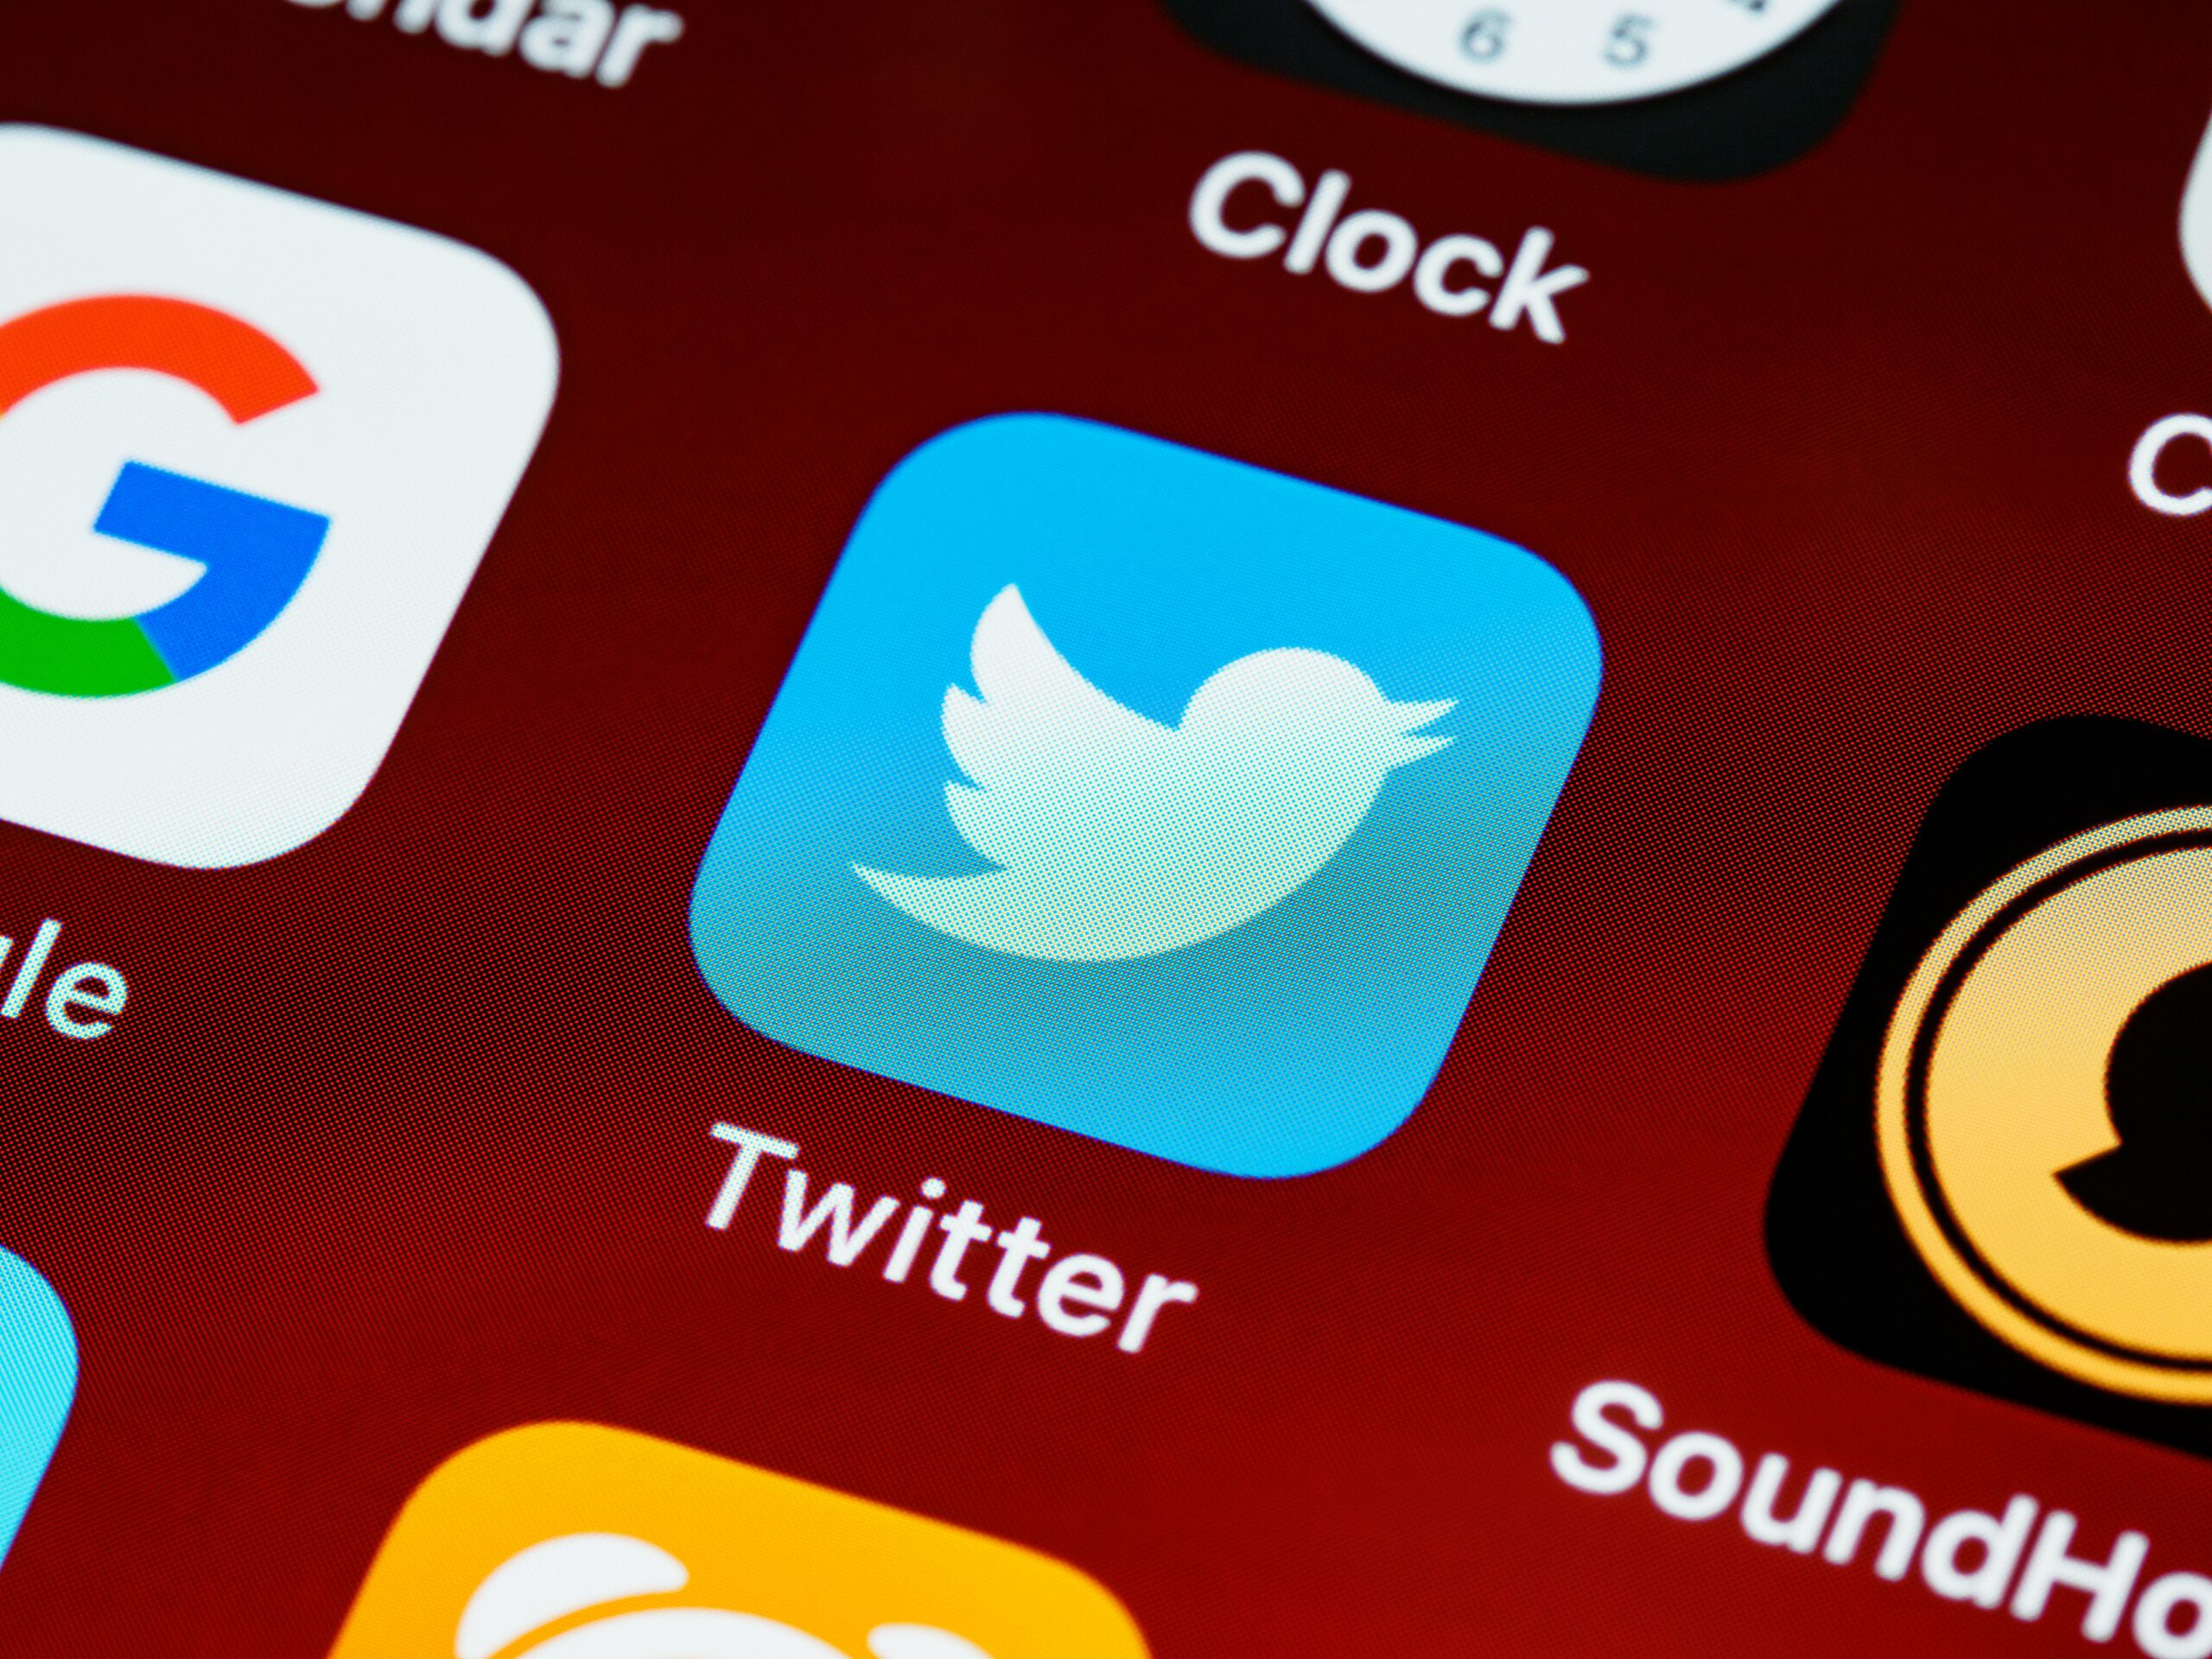 How to See the Tweets of People You Follow on Twitter